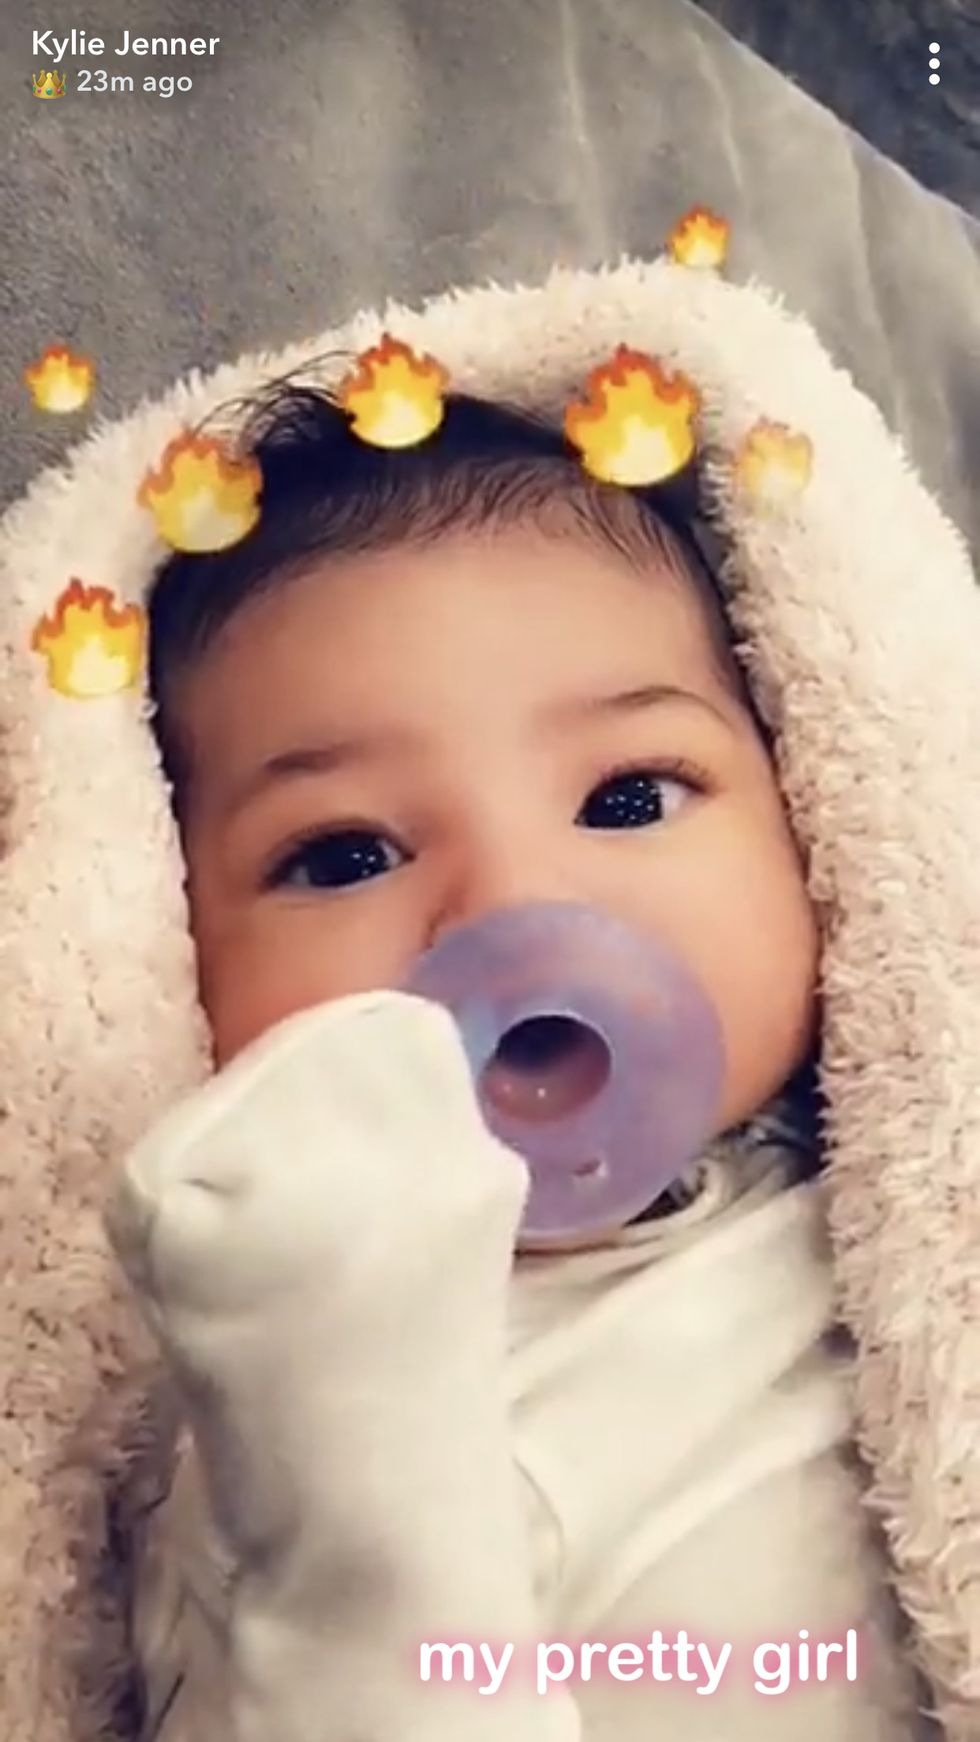 Kylie Jenner Posts Photo of Stormi's Face on Snapchat - See First Full ...